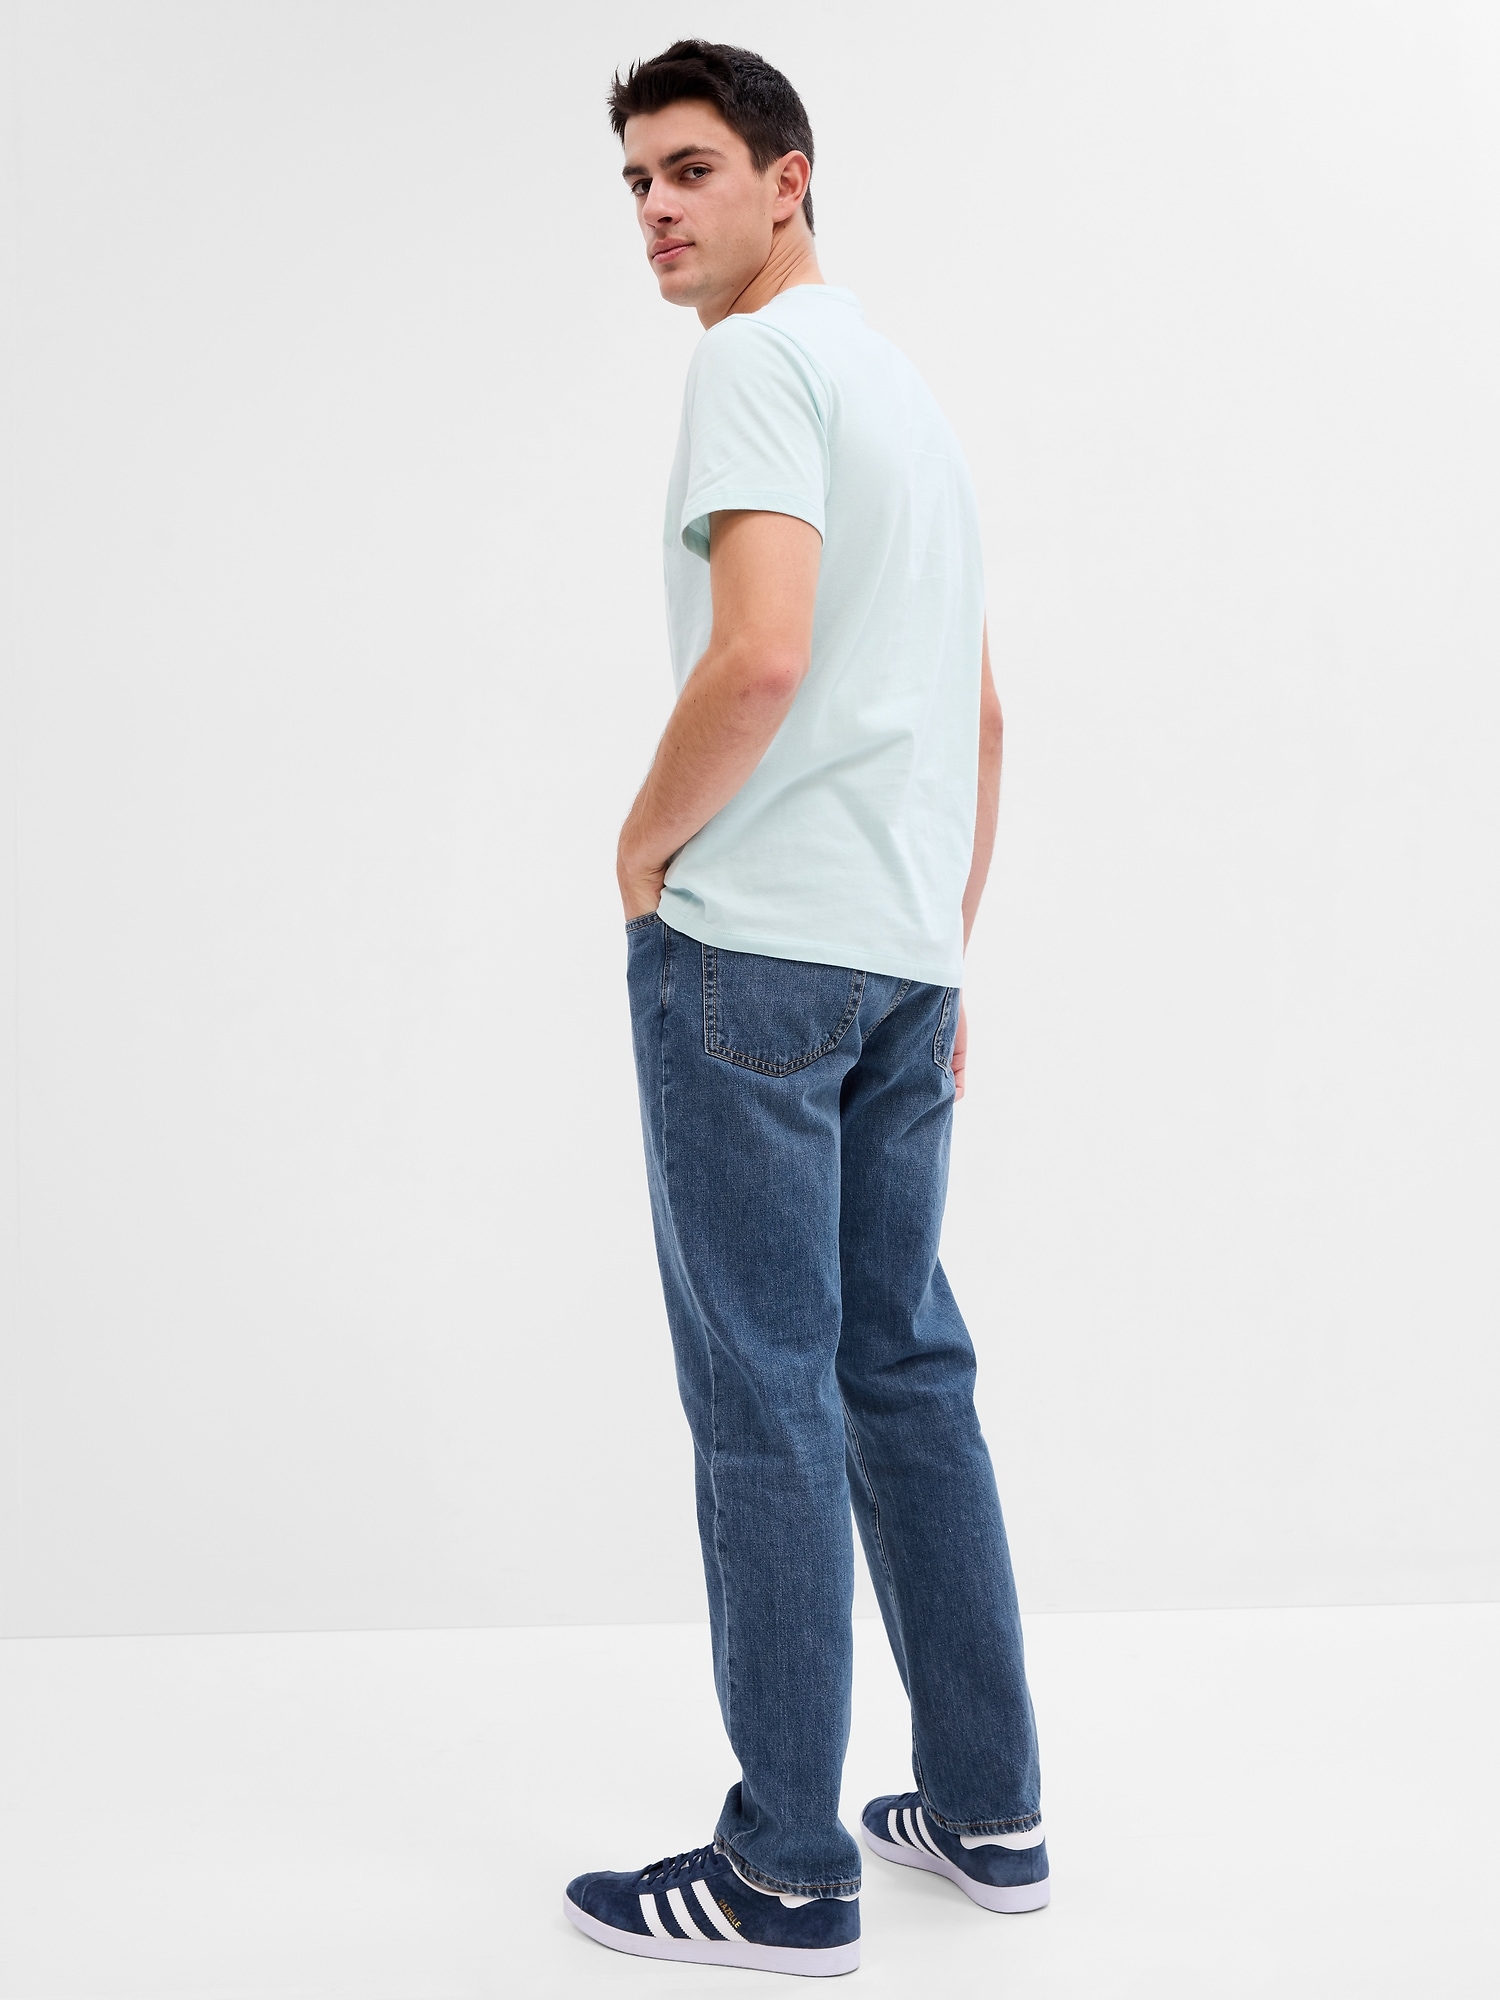 Straight Jeans | Gap Factory